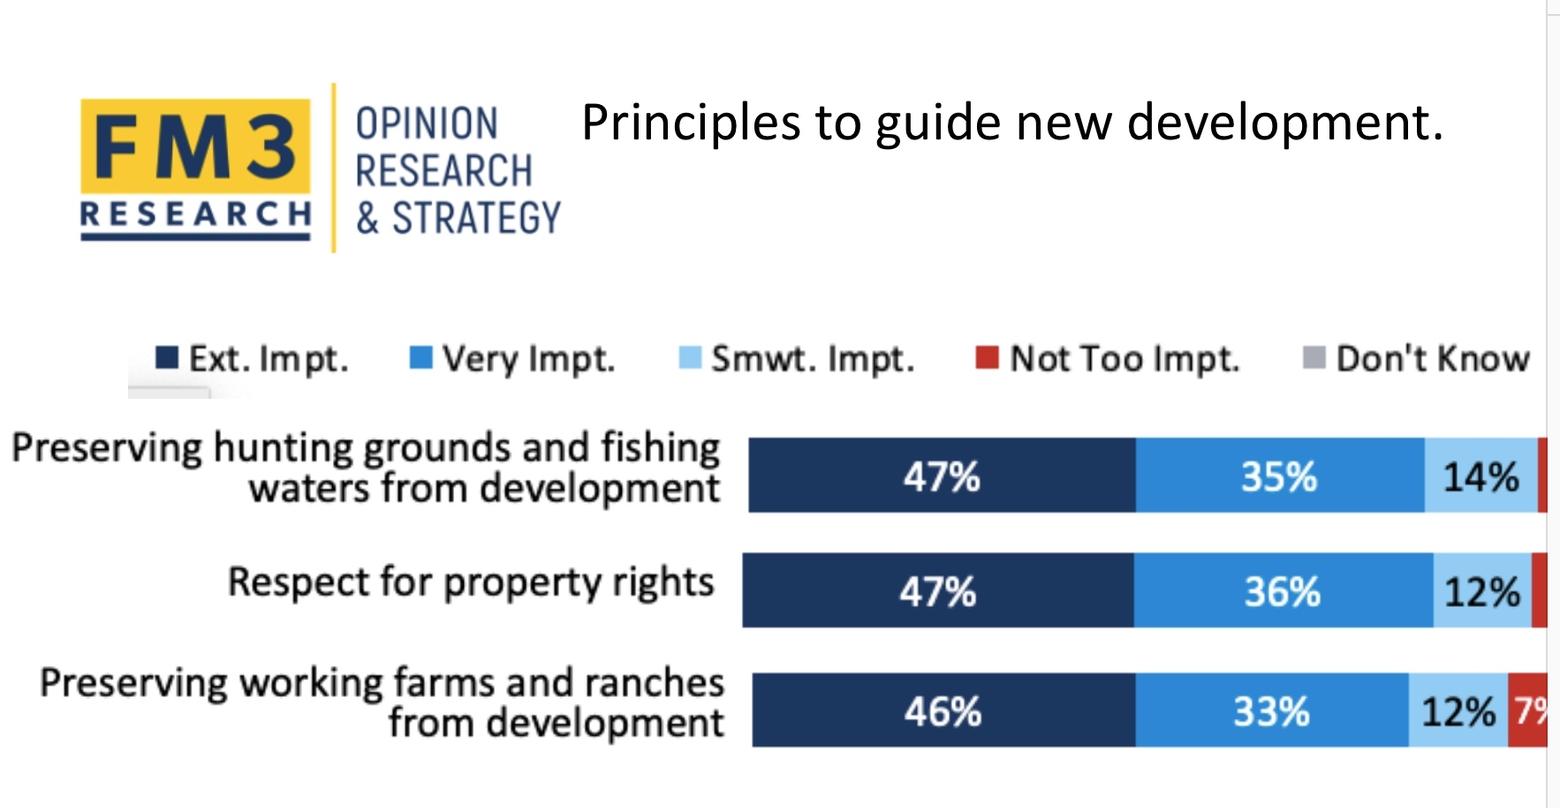 While citizens who participated in the polls voiced reverence for private property rights, their support came within the context of individual rights not coming at the expense of habitat important for hunting, fishing and keeping ag lands protected so that farmers and ranchers can continue to be important parts of the community.